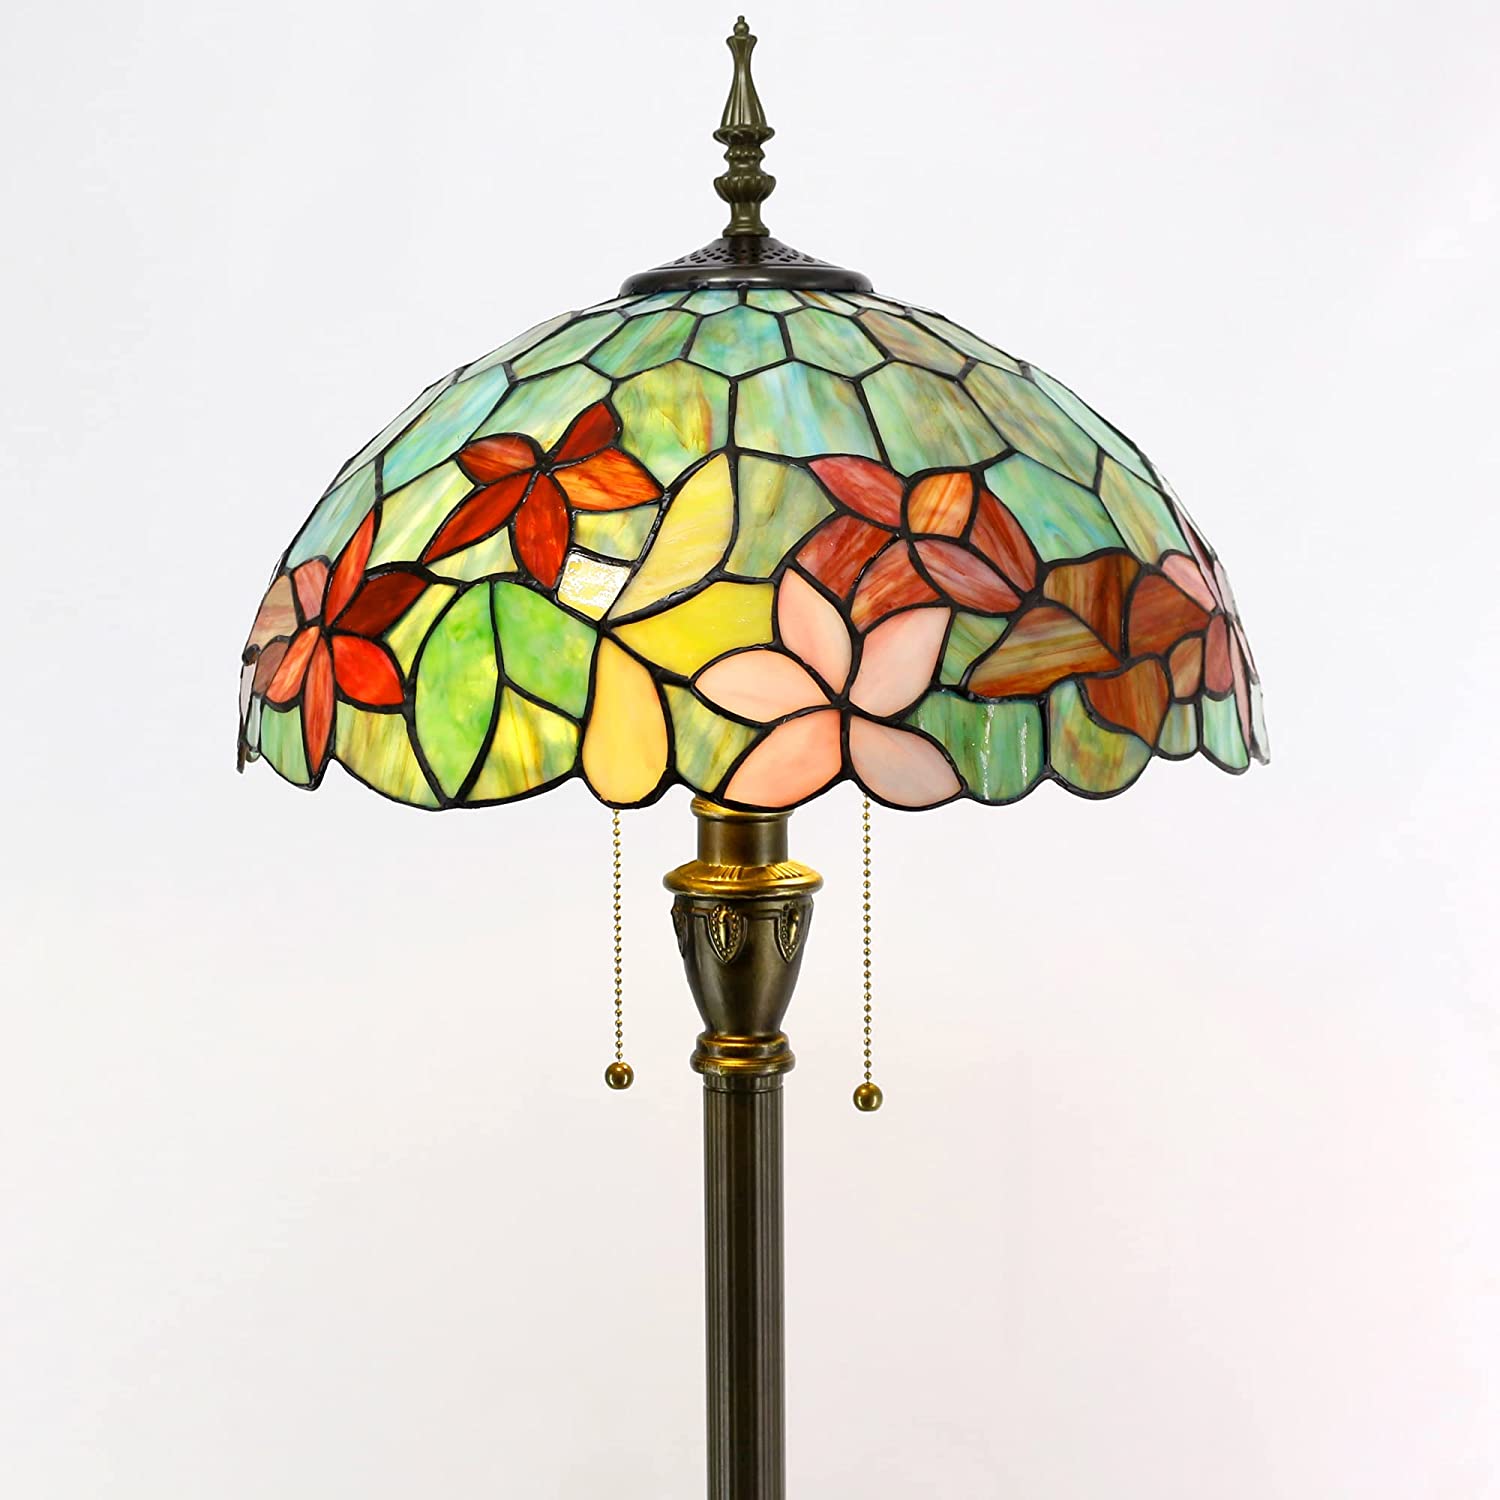 Werfactory® Tiffany Floor Lamp W16H70 Inch Stained Glass Flower Style Reading Lamp